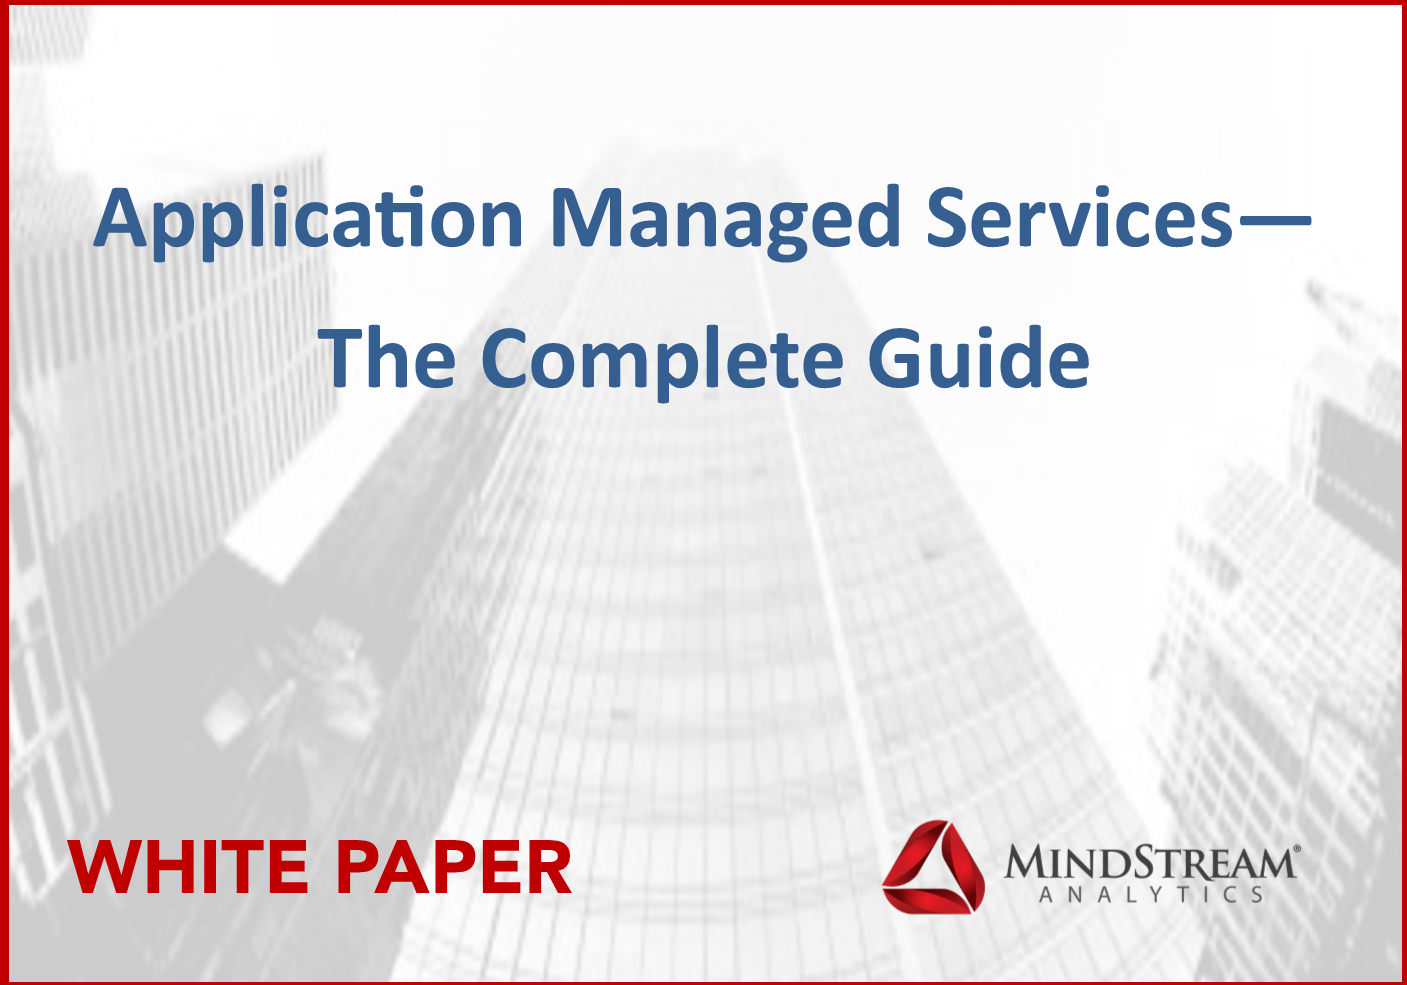 Application Managed Services